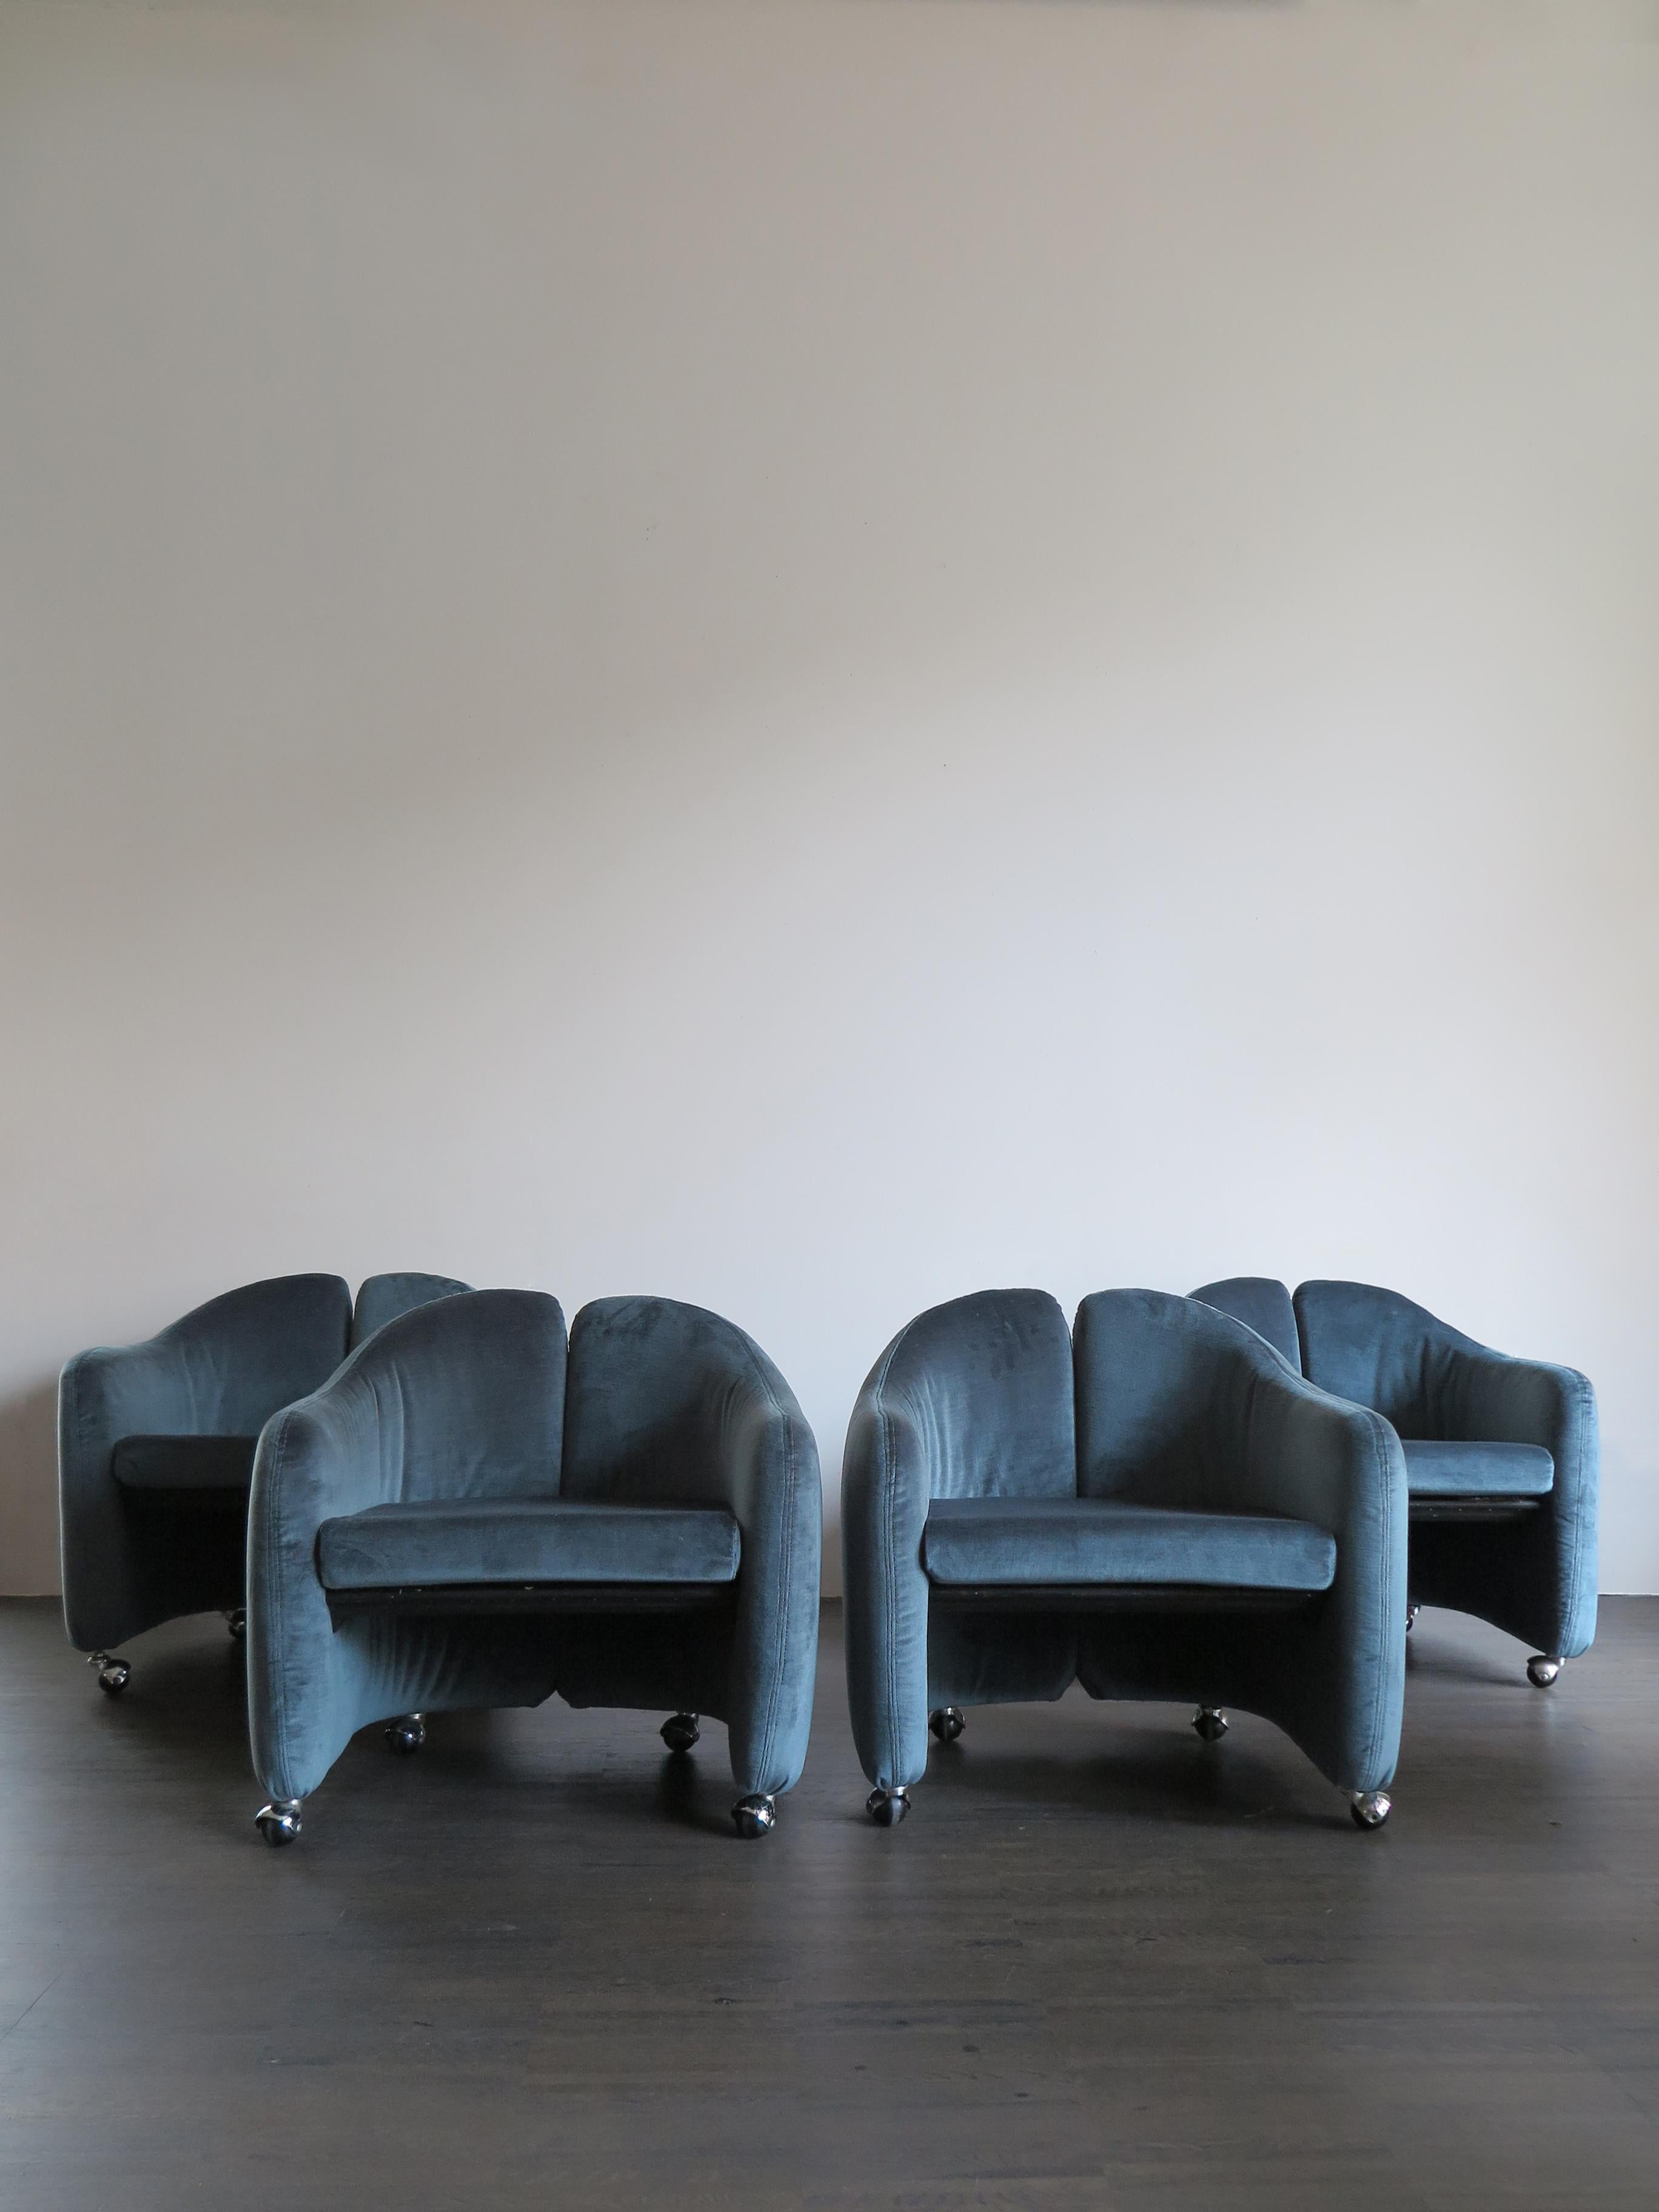 Four Italian padded Mid-Century Modern design armchairs or office chairs designed by Eugenio Gerli for Tecno in 1966 with manufacturer’s label.